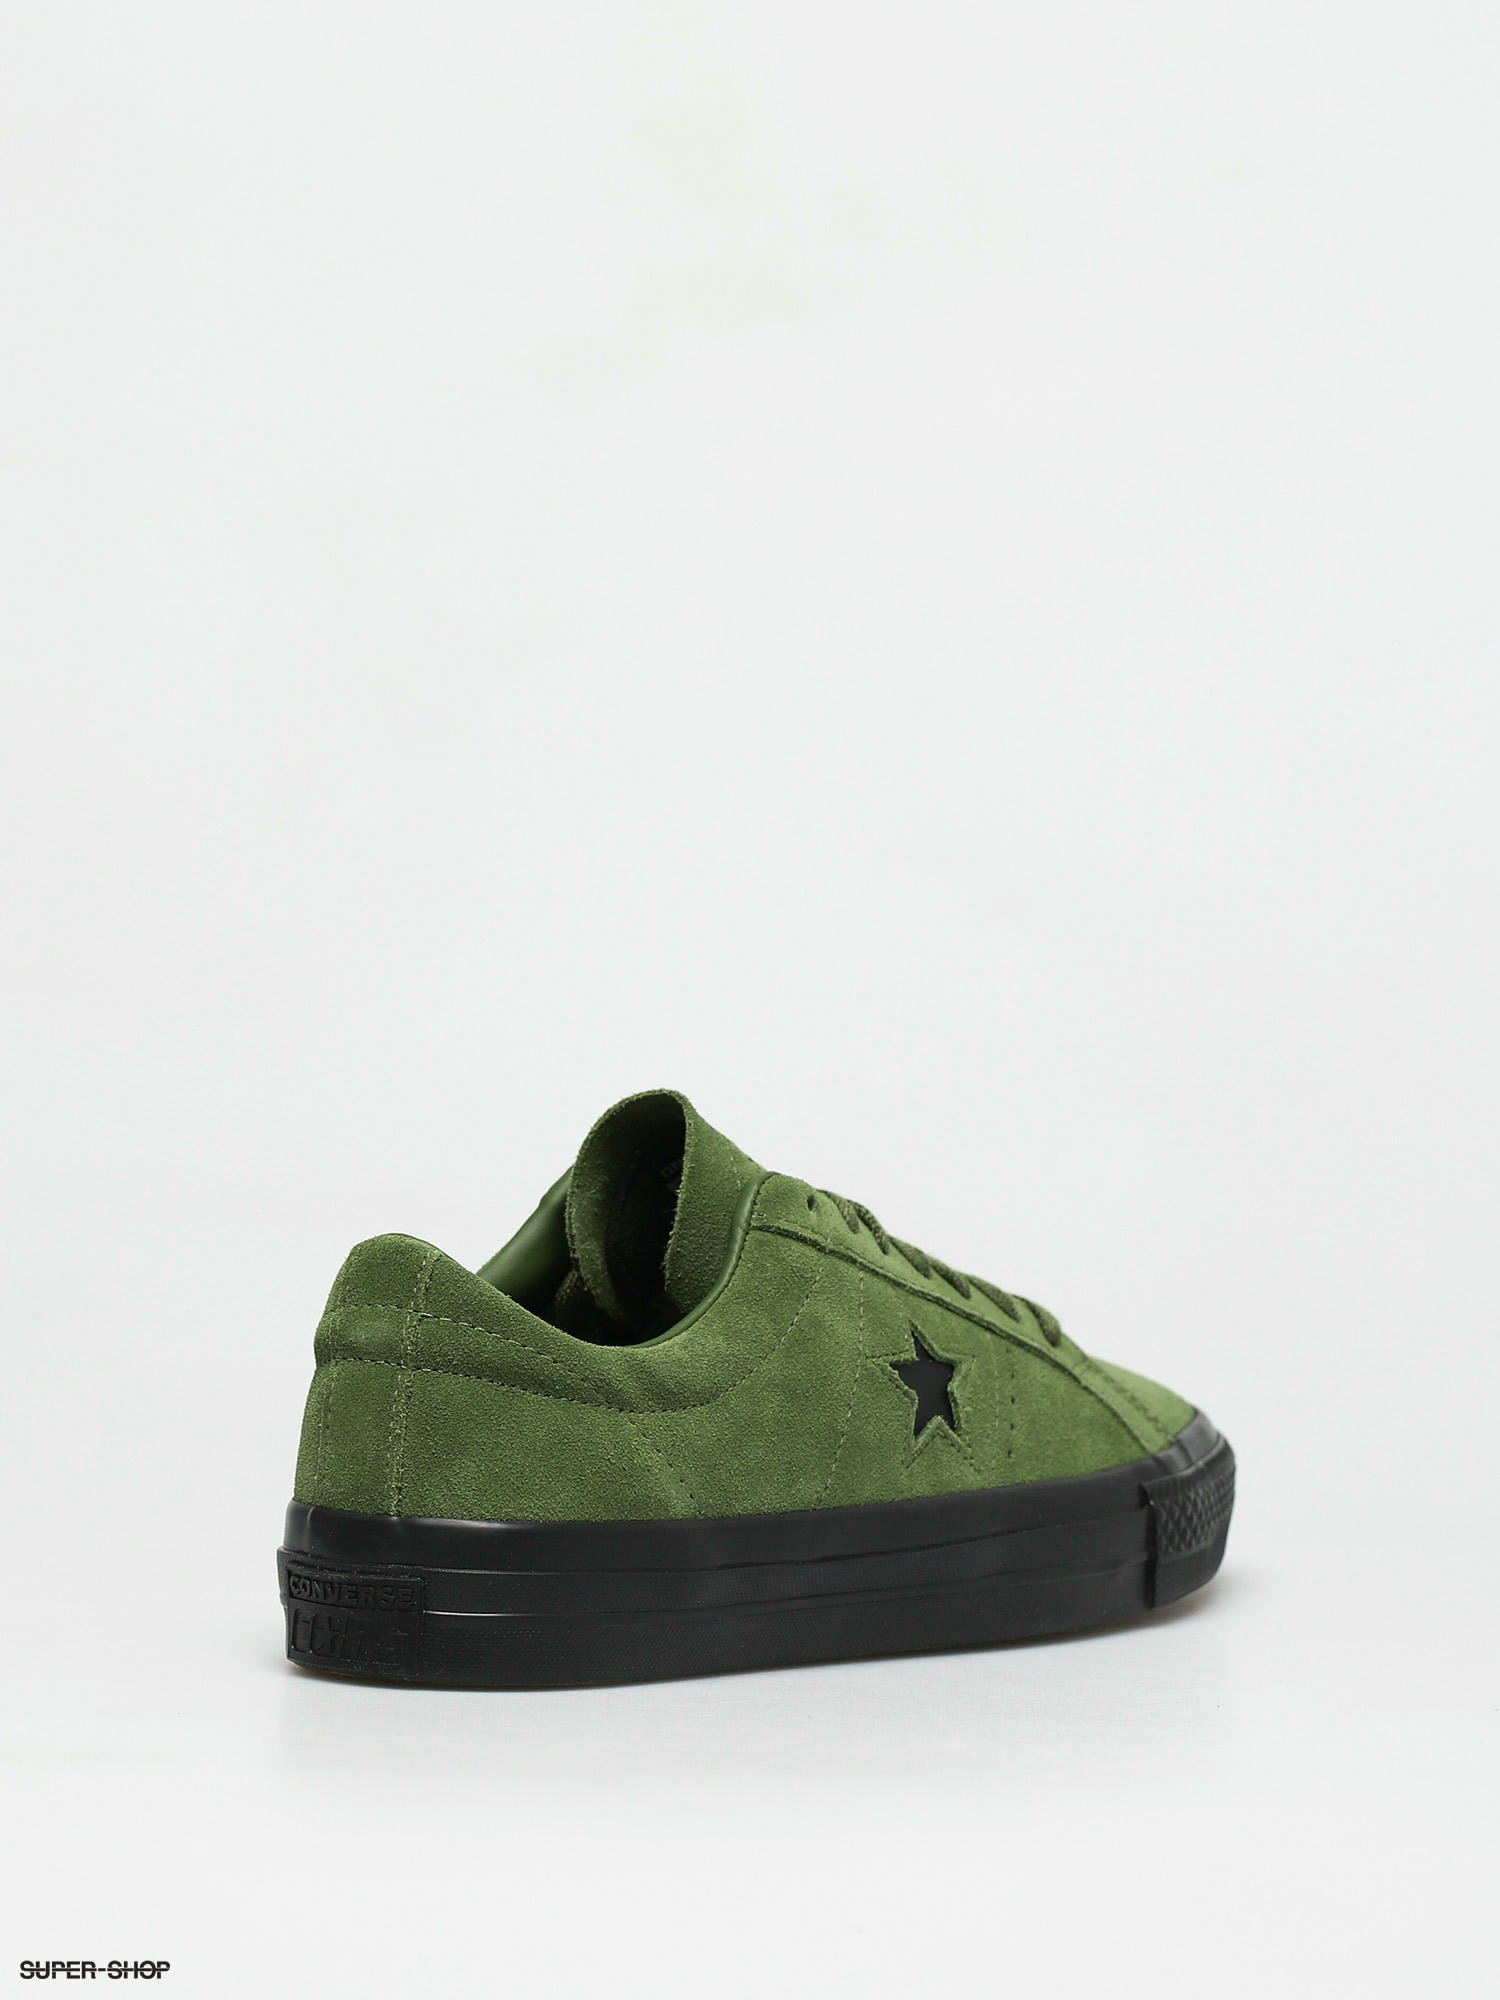 converse one star pro green